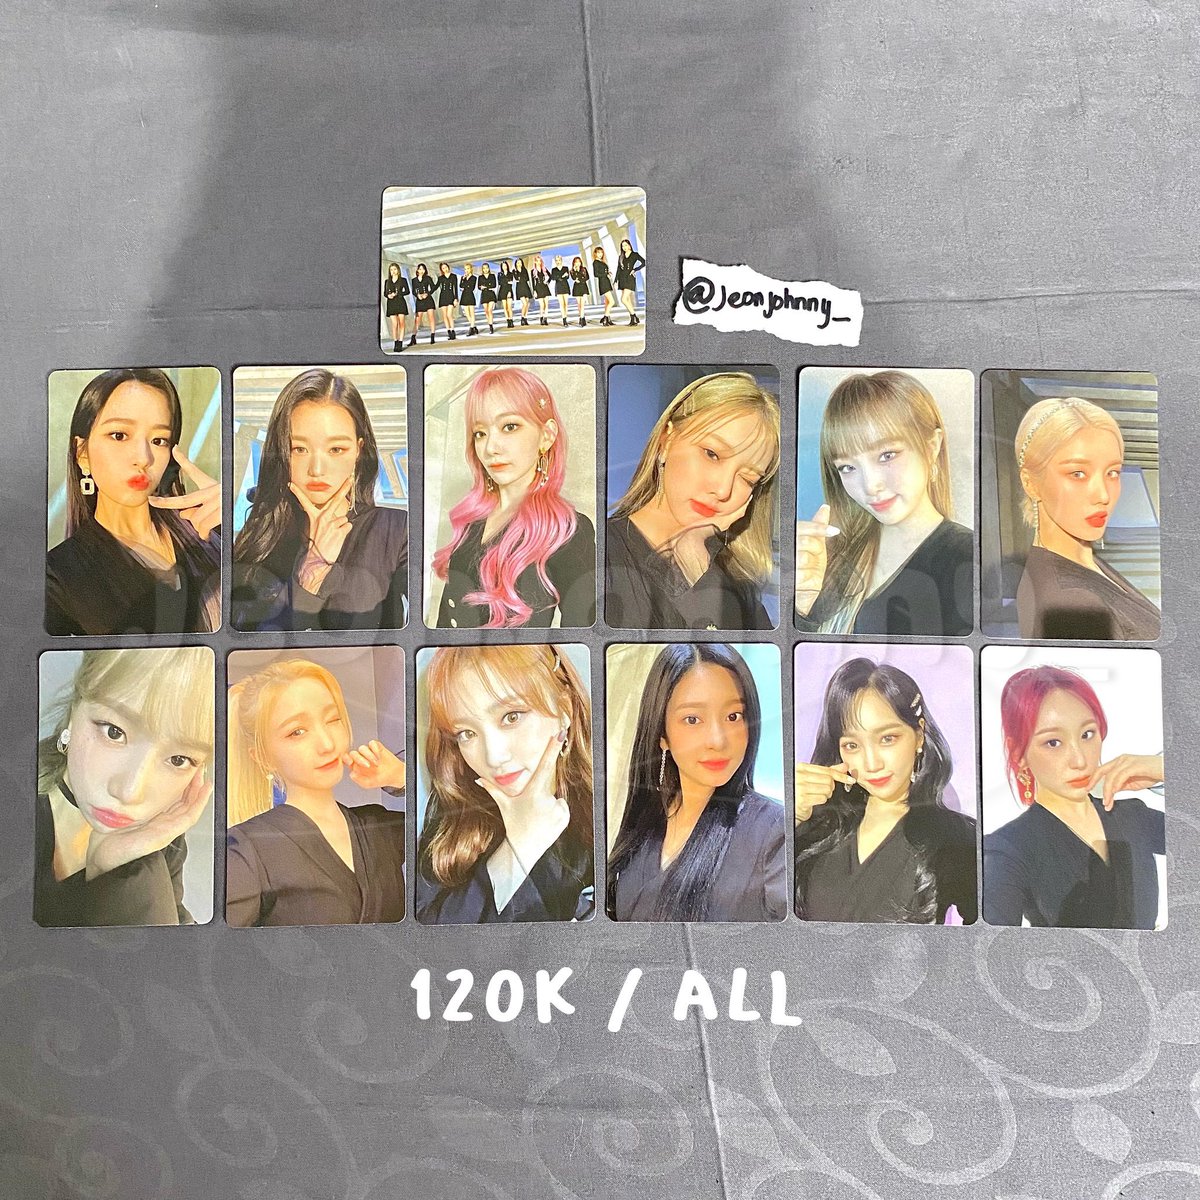 HELP RT🙇🏻‍♂️
wts aab pc photocard wonyoung jennie

♡ based ina, ww √ but have indonesia addres
♡ sensitive buyer x.
♡ first pay, first get!
♡ ada yg bisa satuan, pair, bundle dm for detail

t. wts lfb ive bp nct photocard aespa treasure 아이브 양도 #ตลาดนัดive #ตลาดนัดblackpink